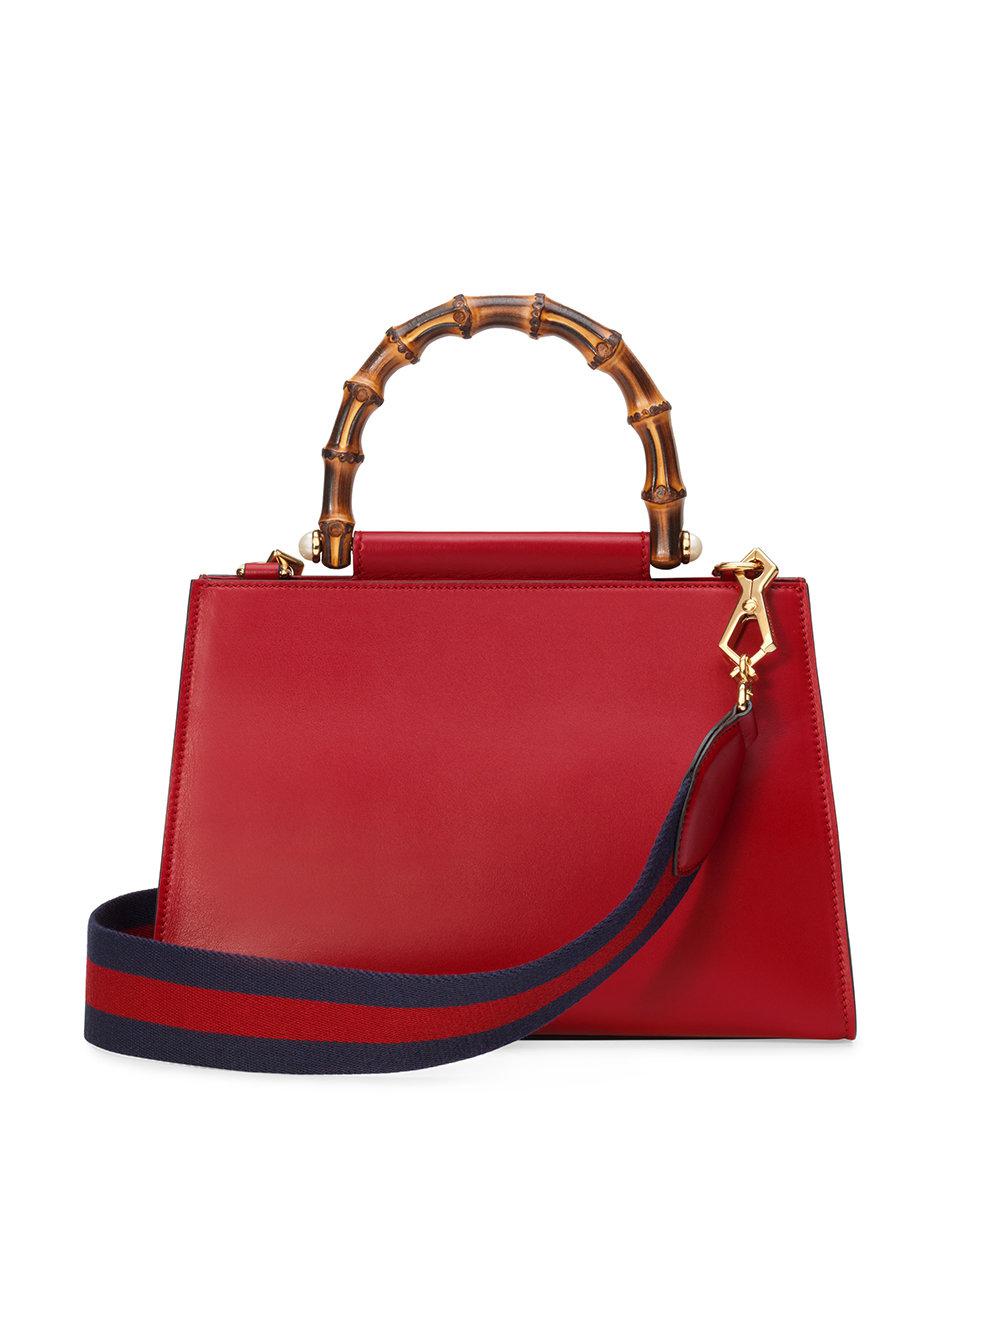 Gucci Nymphaea Leather Top Handle Bag in Red | Lyst